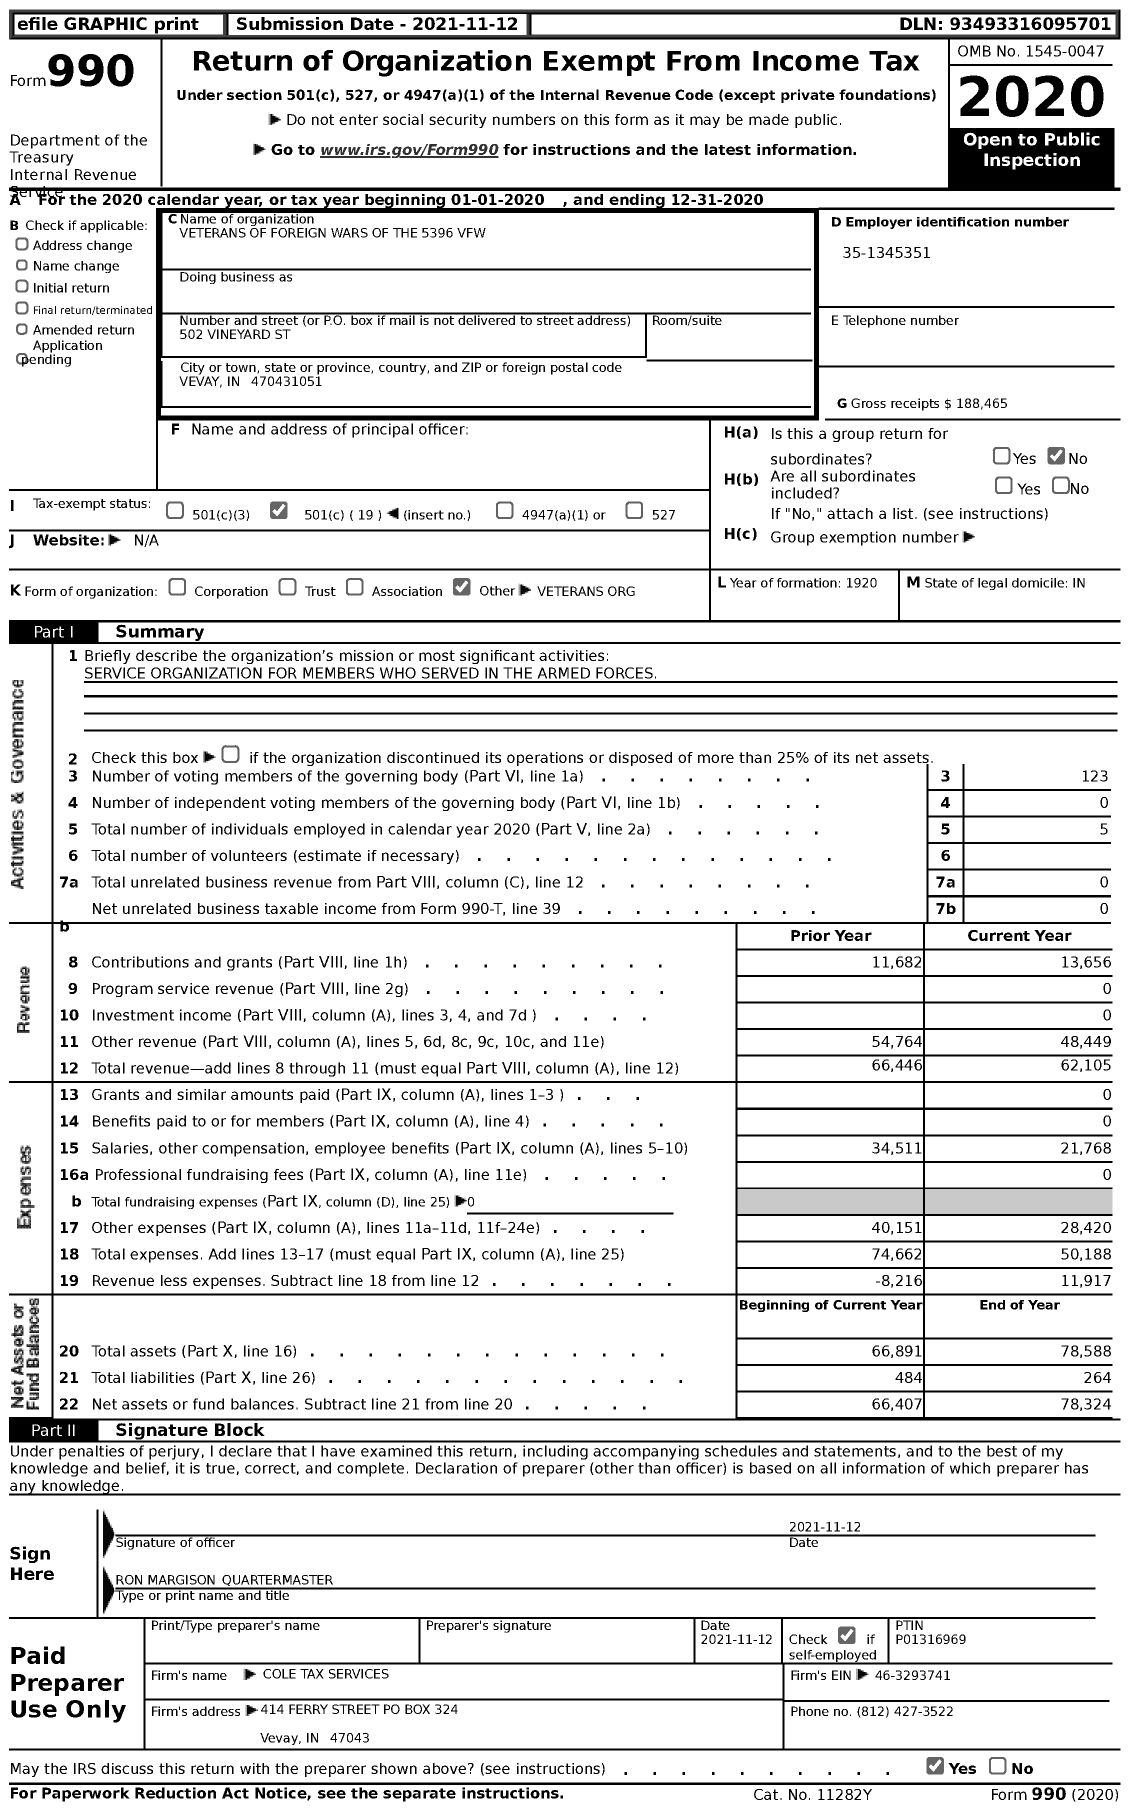 Image of first page of 2020 Form 990 for VFW Department of Indiana - 5396 Vfw-Ind Rosenberger